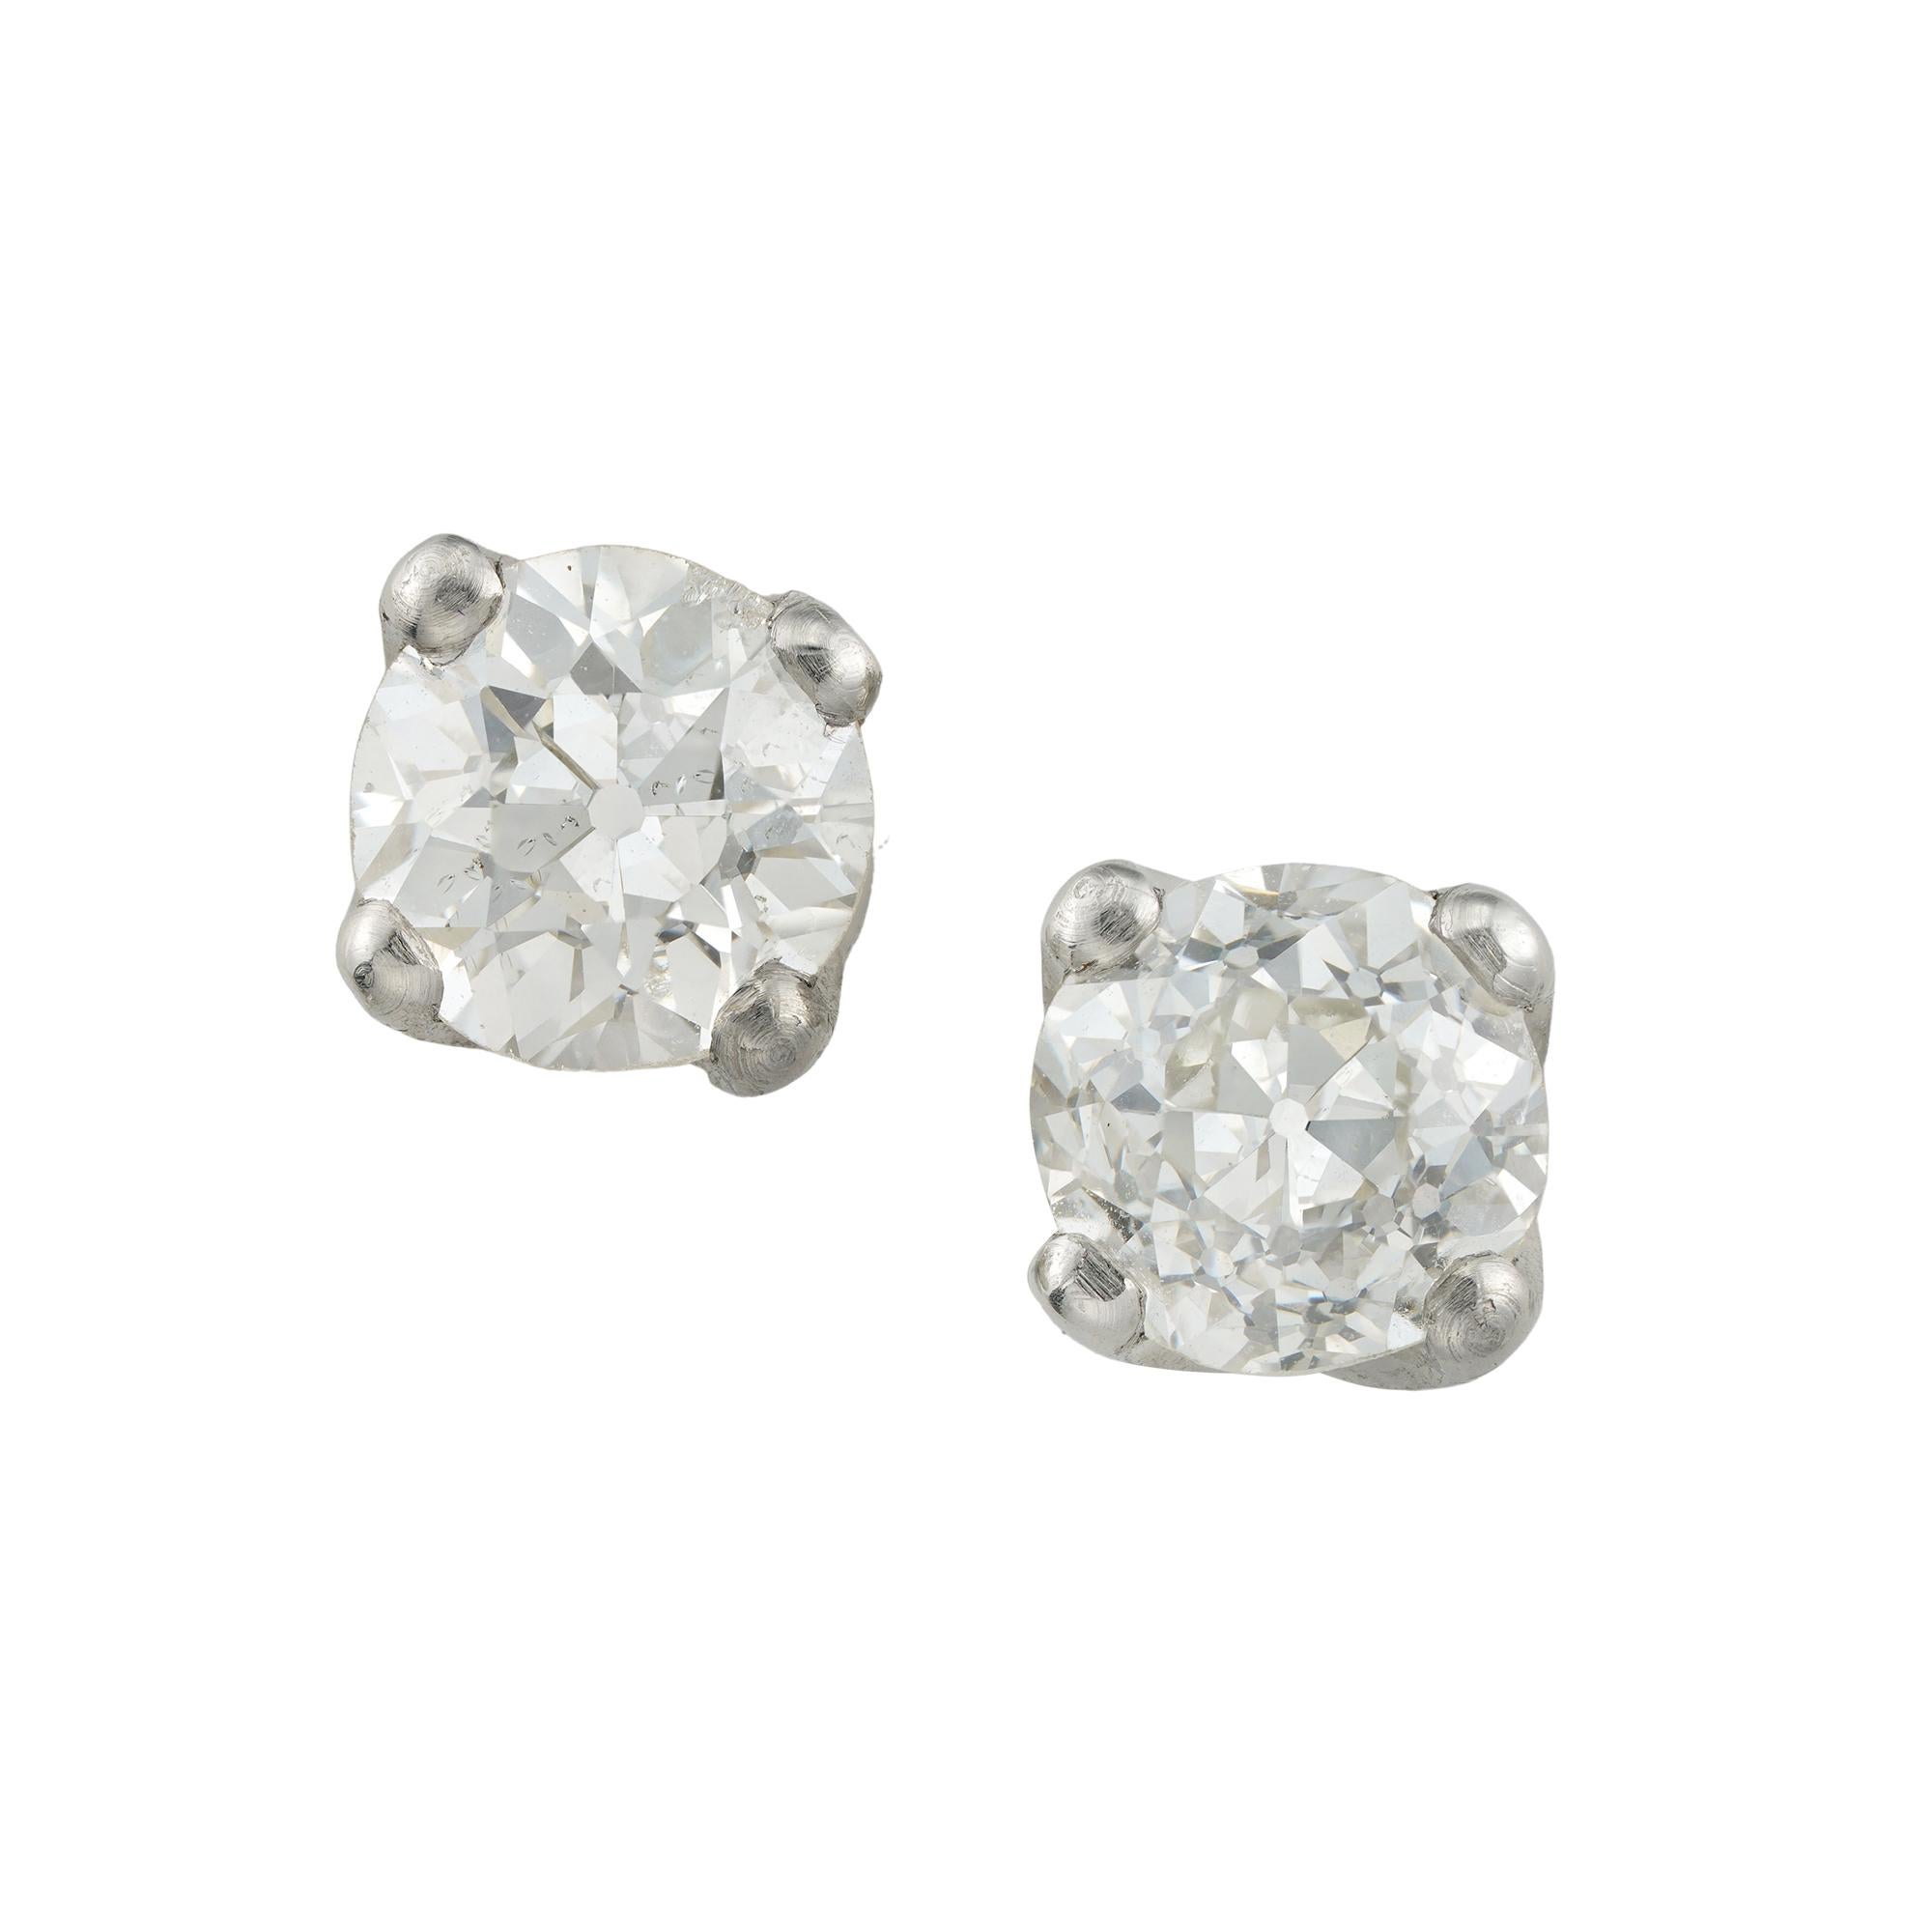 A pair of old-cut diamond stud earrings, the two old European-cut diamonds, the one of weighing 0.63 carats of I colour and VS2 clarity, the other diamond weighing 0.60 carats of K colour and I1 clarity, both accompanied by De Beers grading reports,